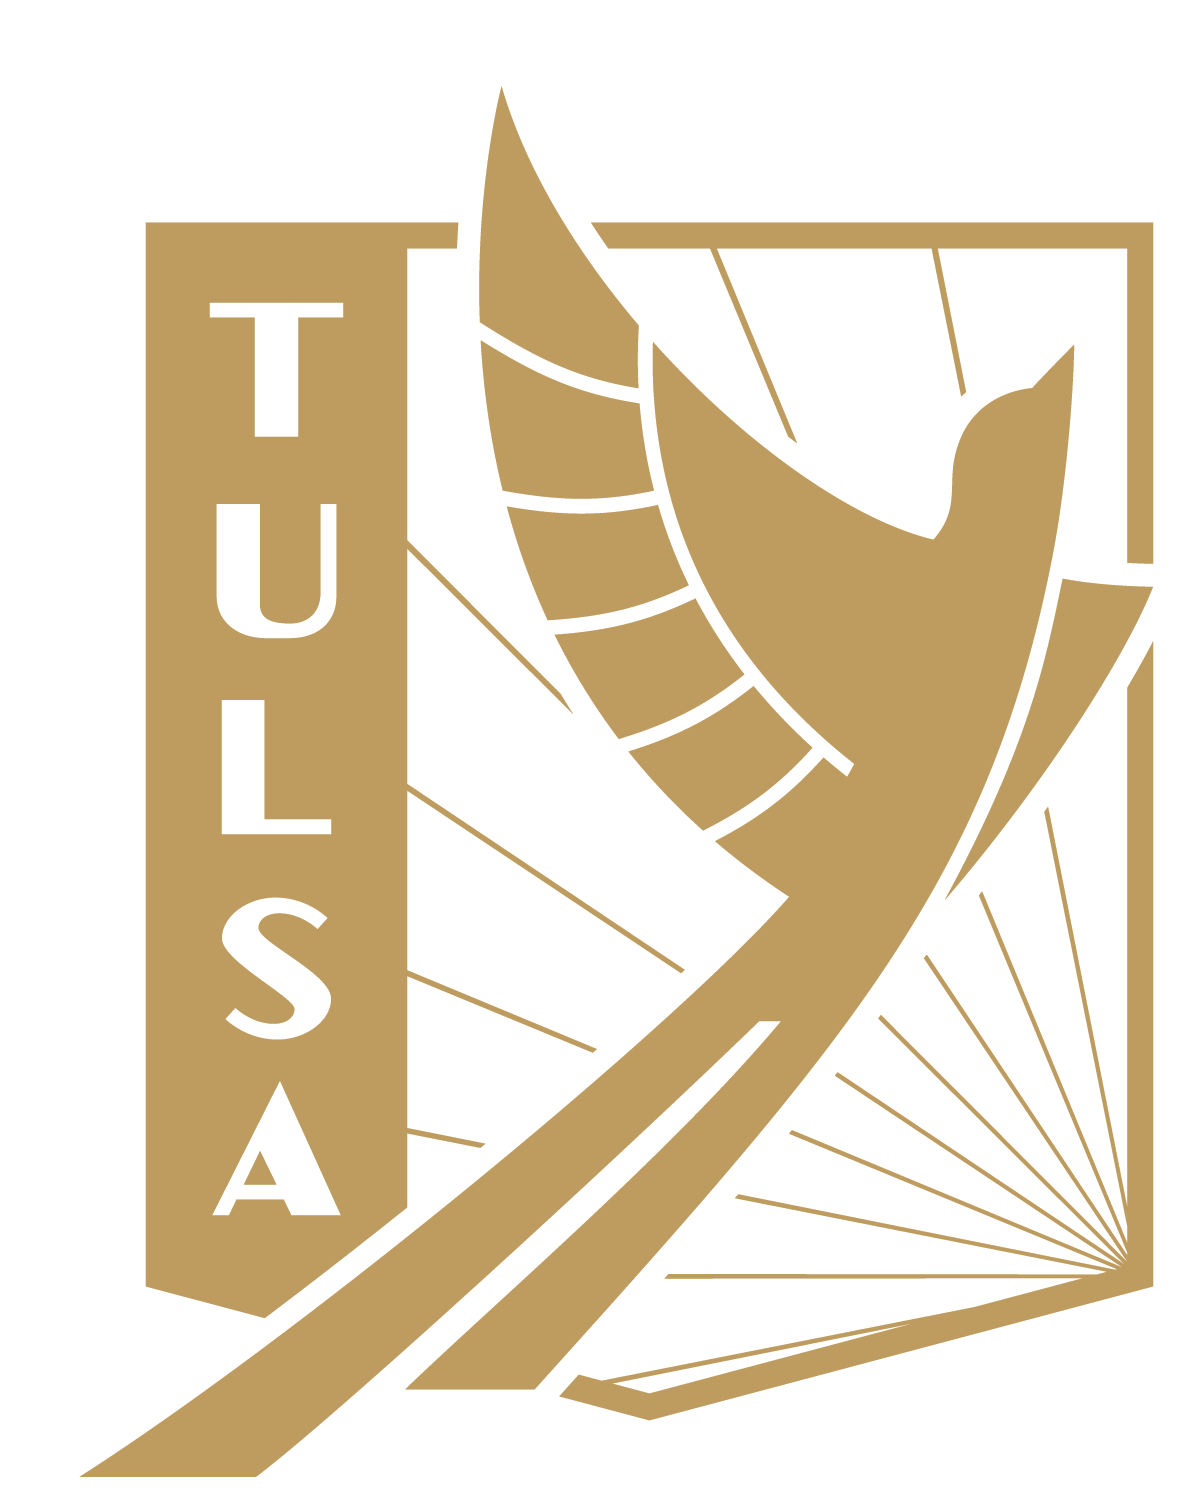 FC Tulsa Unveils New Name, Colors and Crest to Usher in New Era of Pro